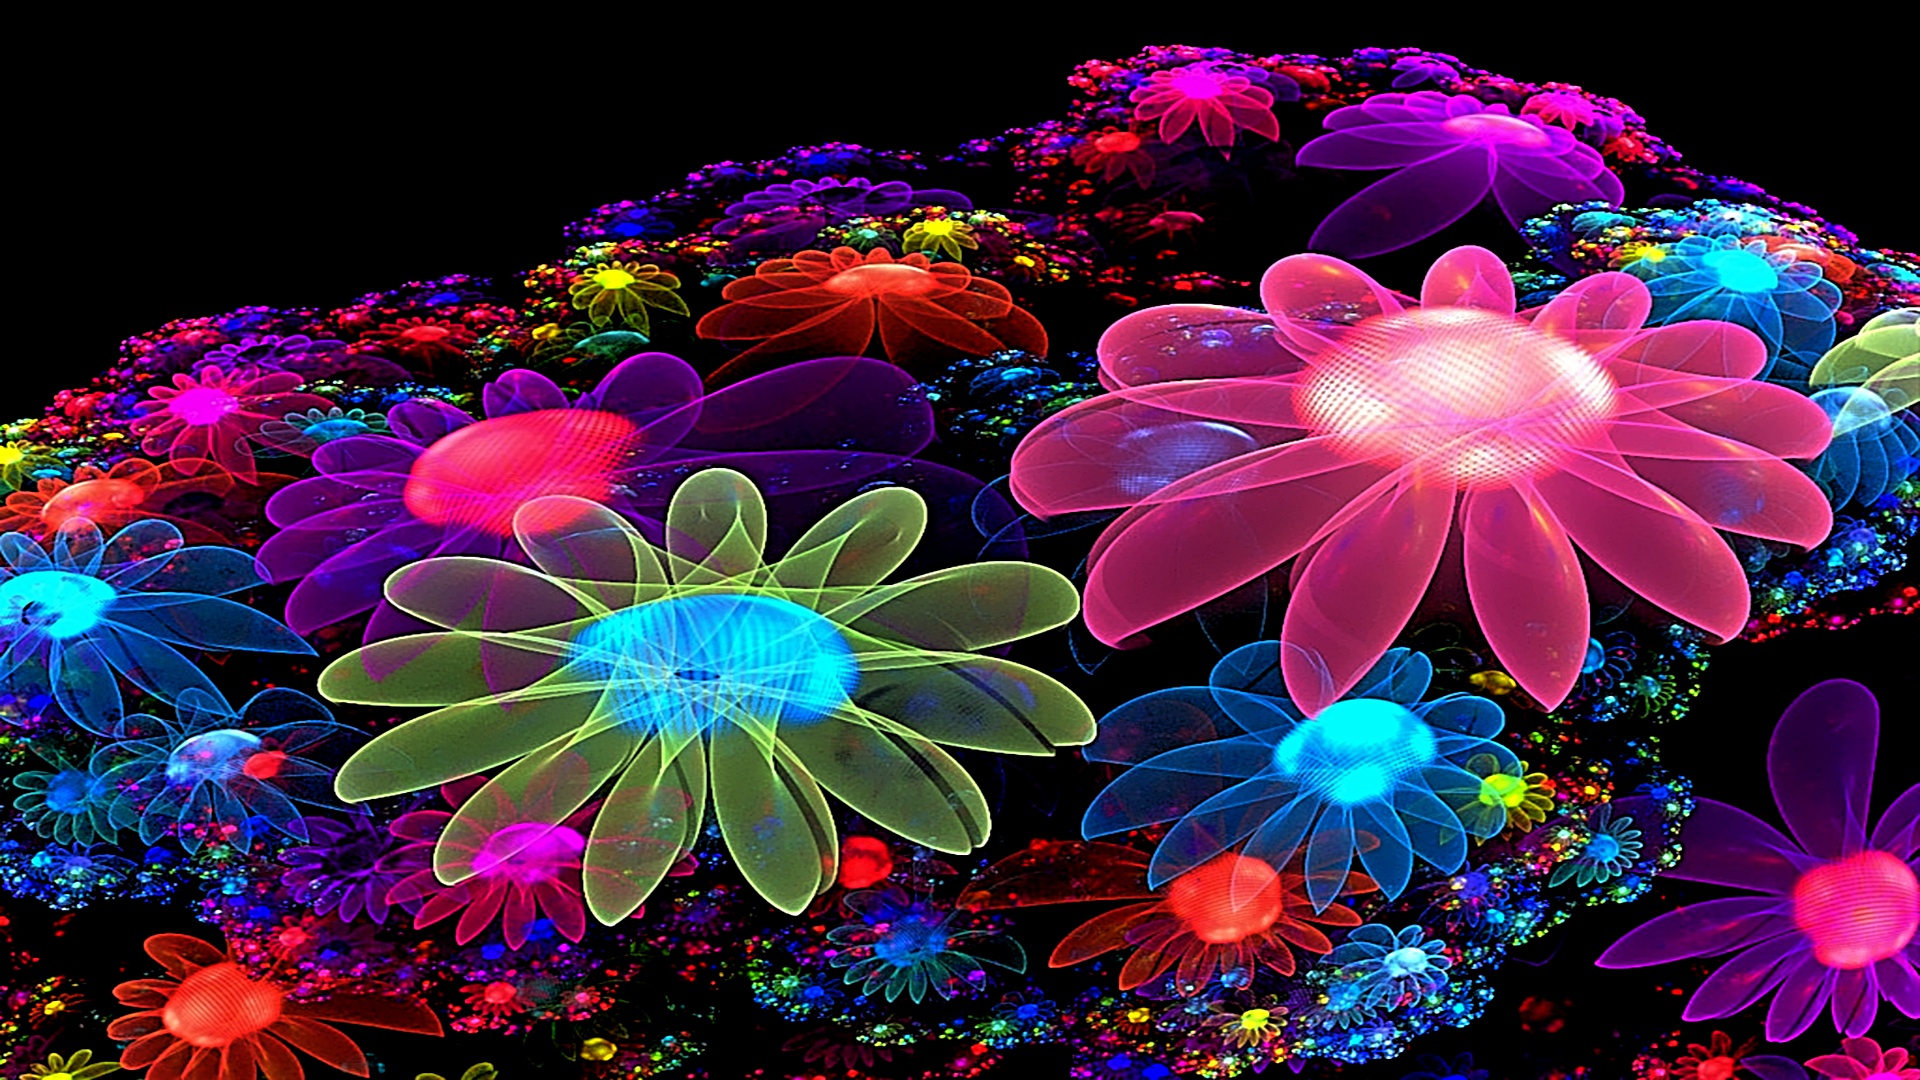  3D Wallpapers Cool Colorful Flowers Desktop Wallpapers Free Images